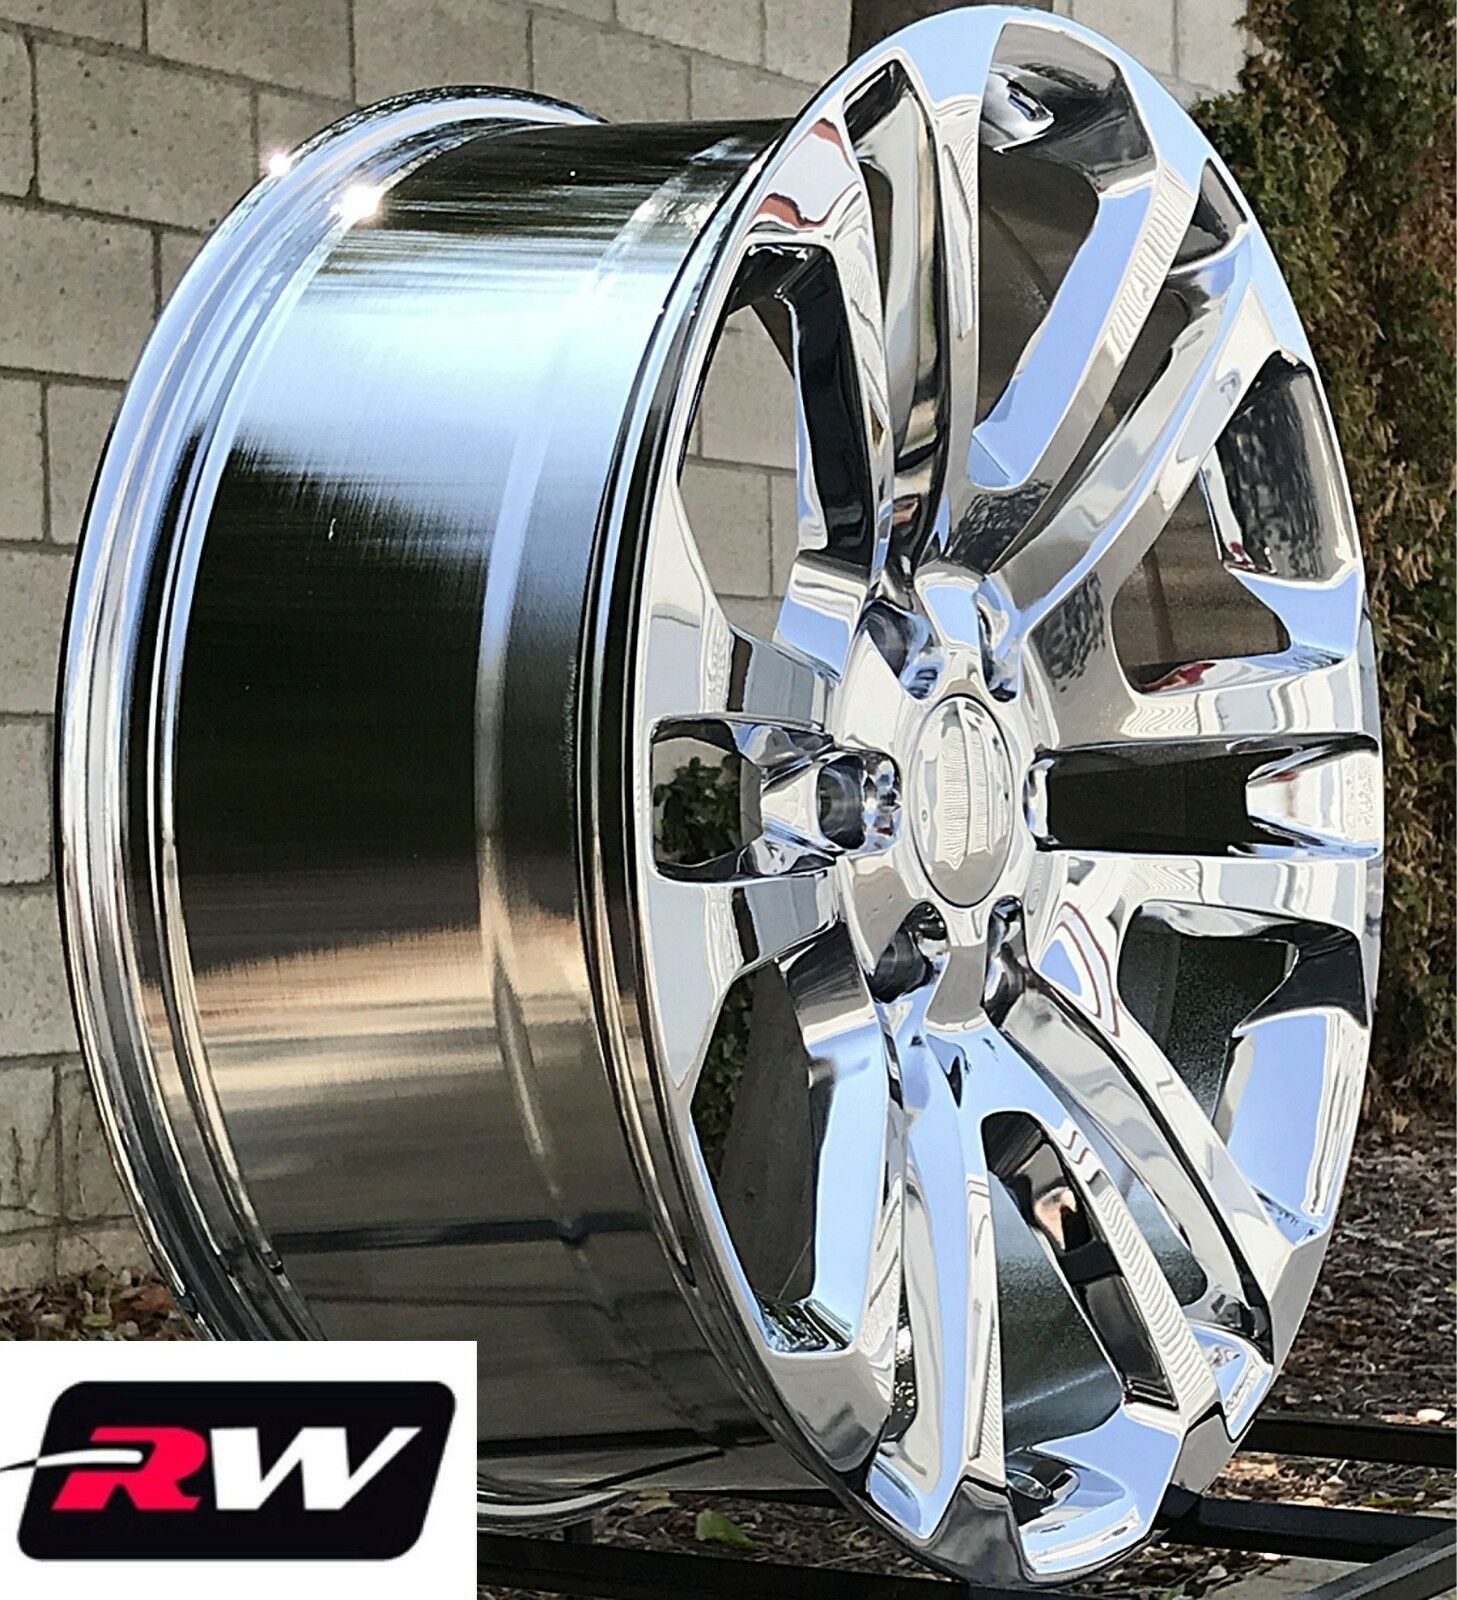 Chevy Tahoe Rims 20 Inch